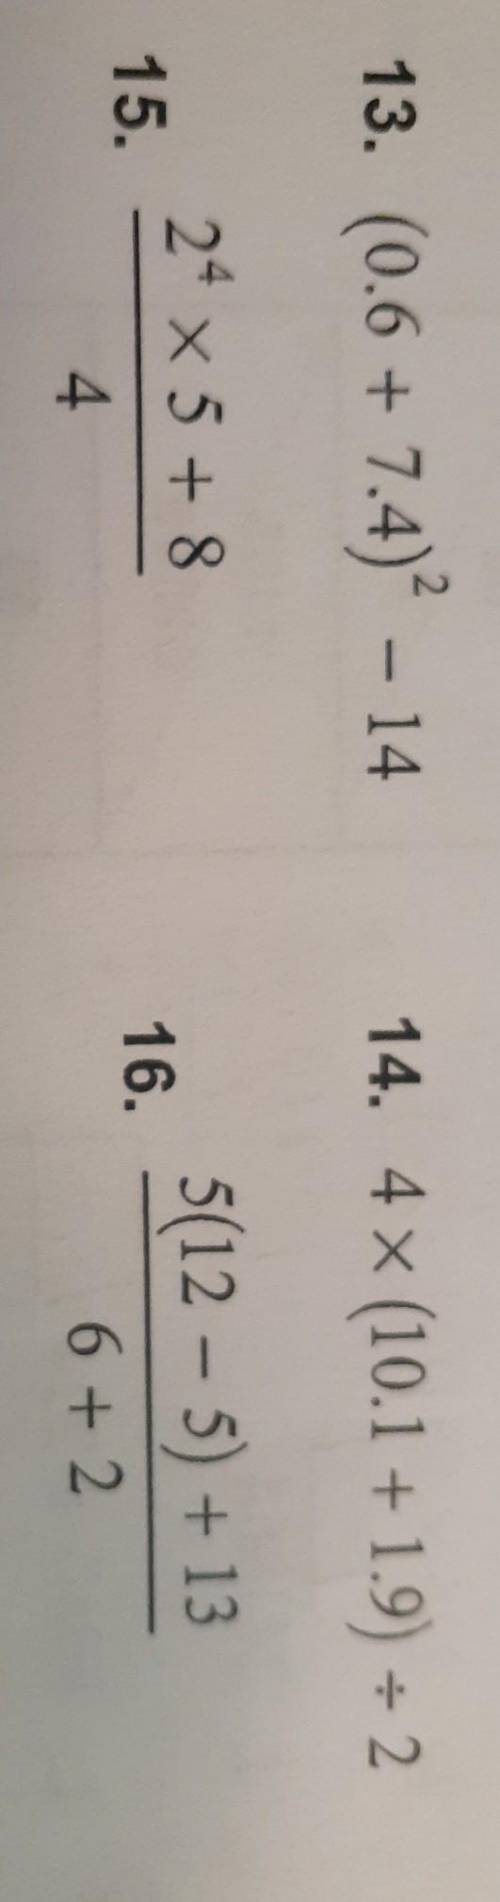 Please help I only need help with 16, 15, and 13. Thank you. (Number 14 is optional if you'd like to